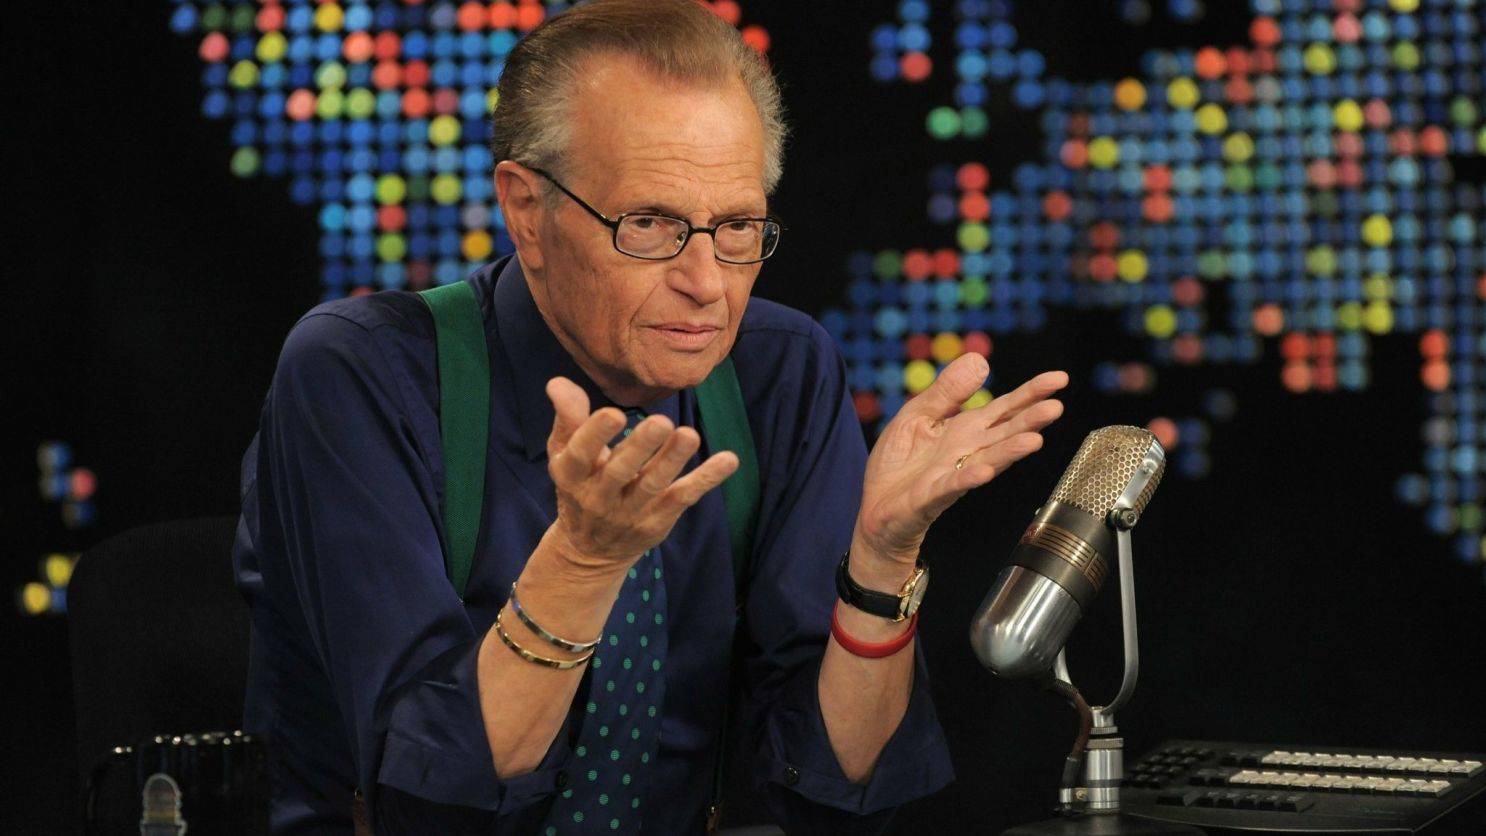 Larry King Veteran TV Host Passed Away at the age of 87